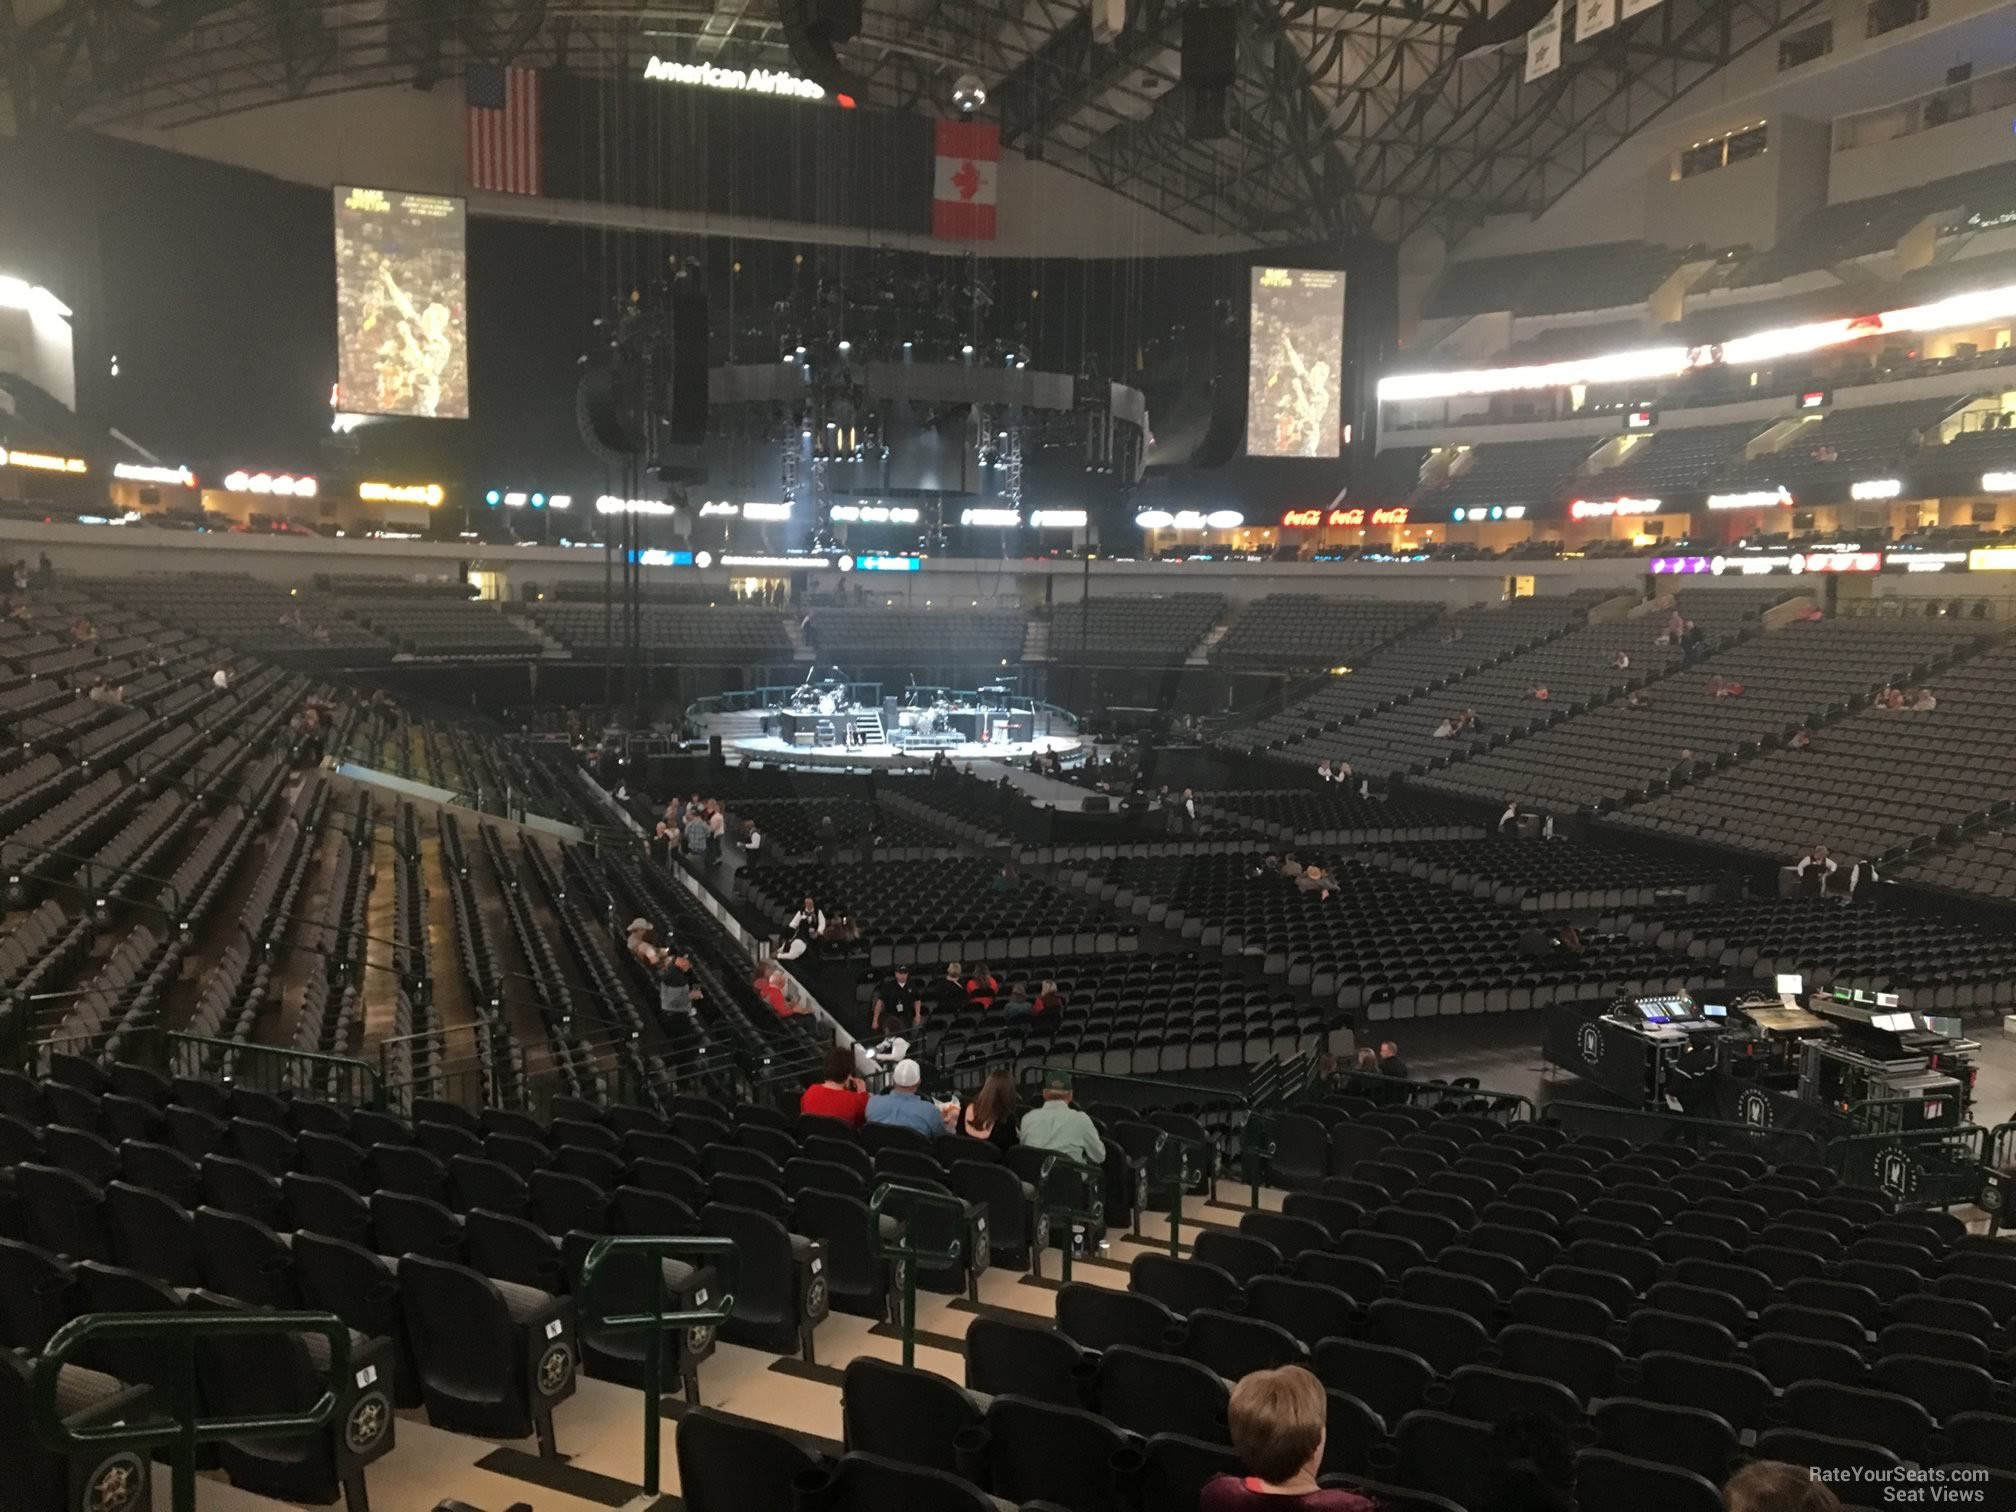 American Airlines Center Concert Seating Chart With Rows